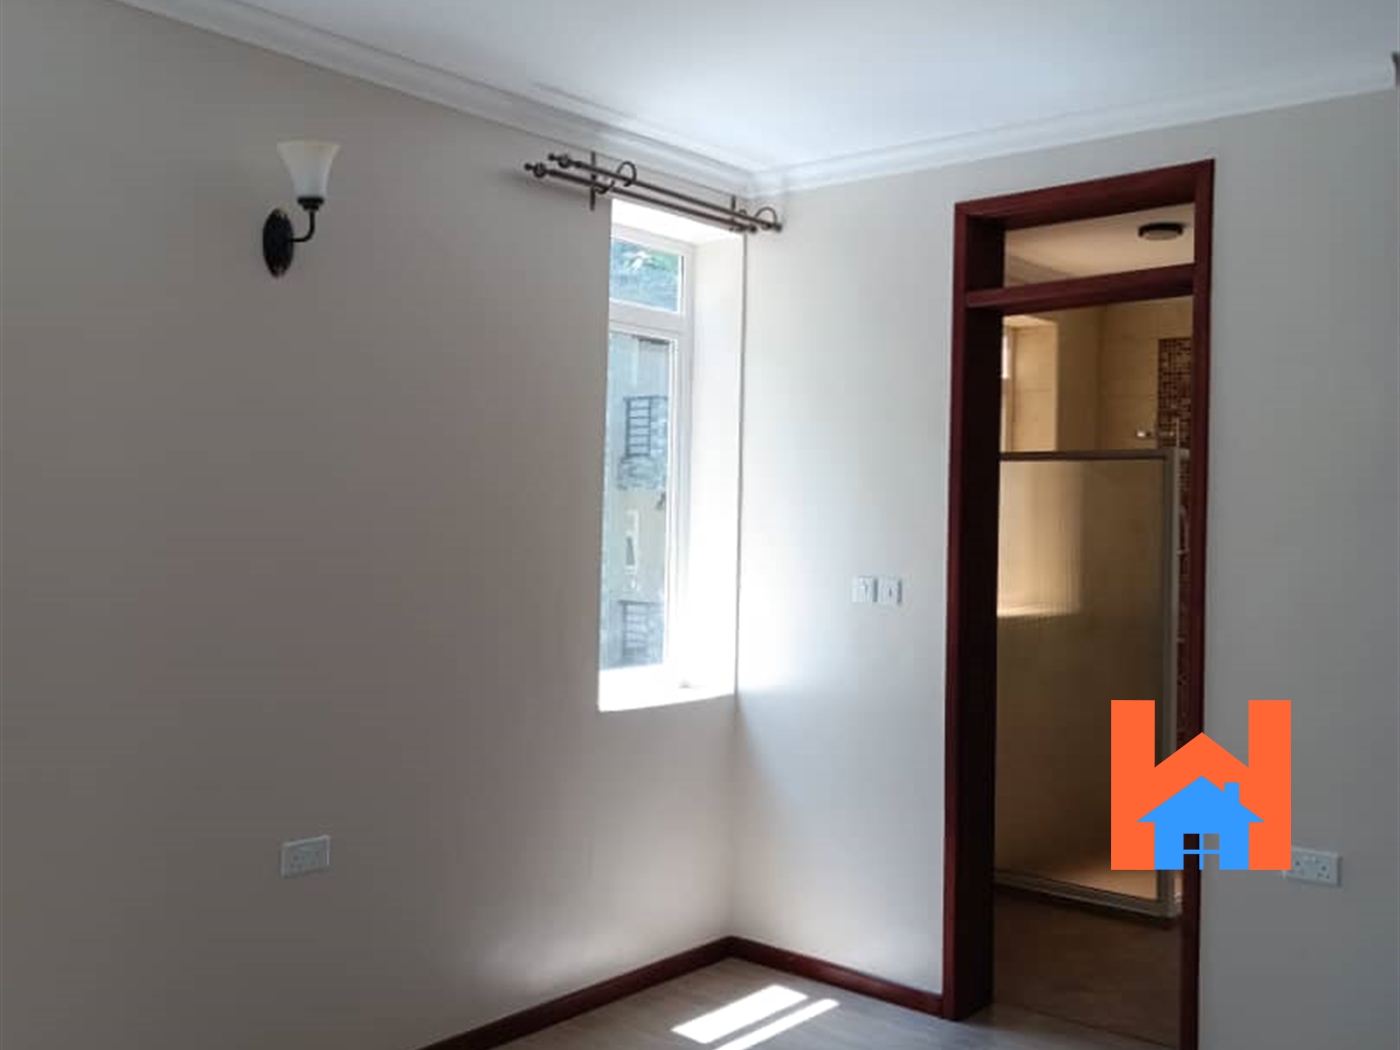 Apartment for sale in Luzira Kampala